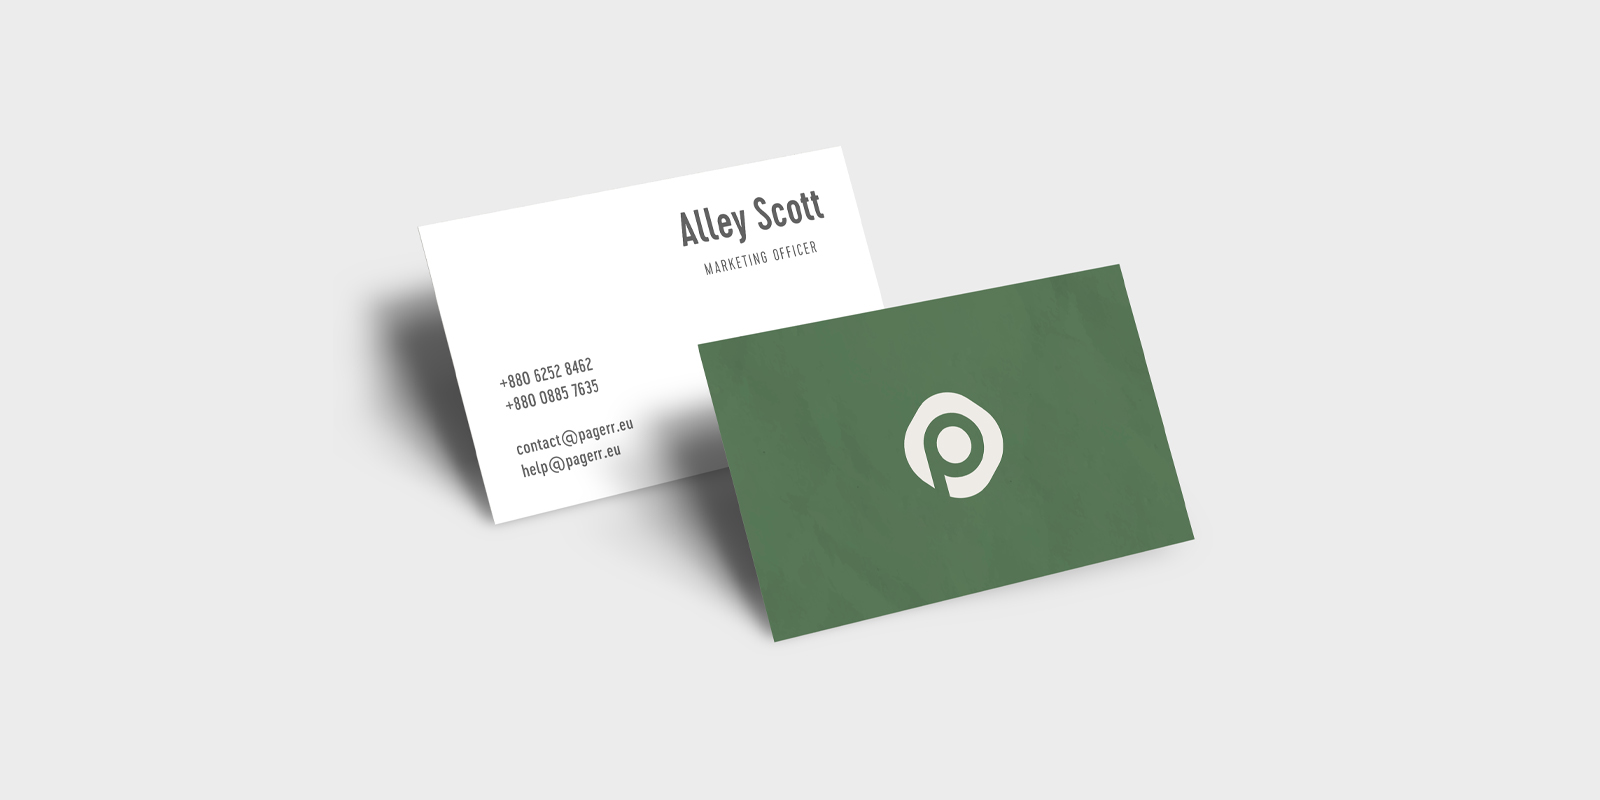 Simple business cards in Melbourne - Print with Pagerr